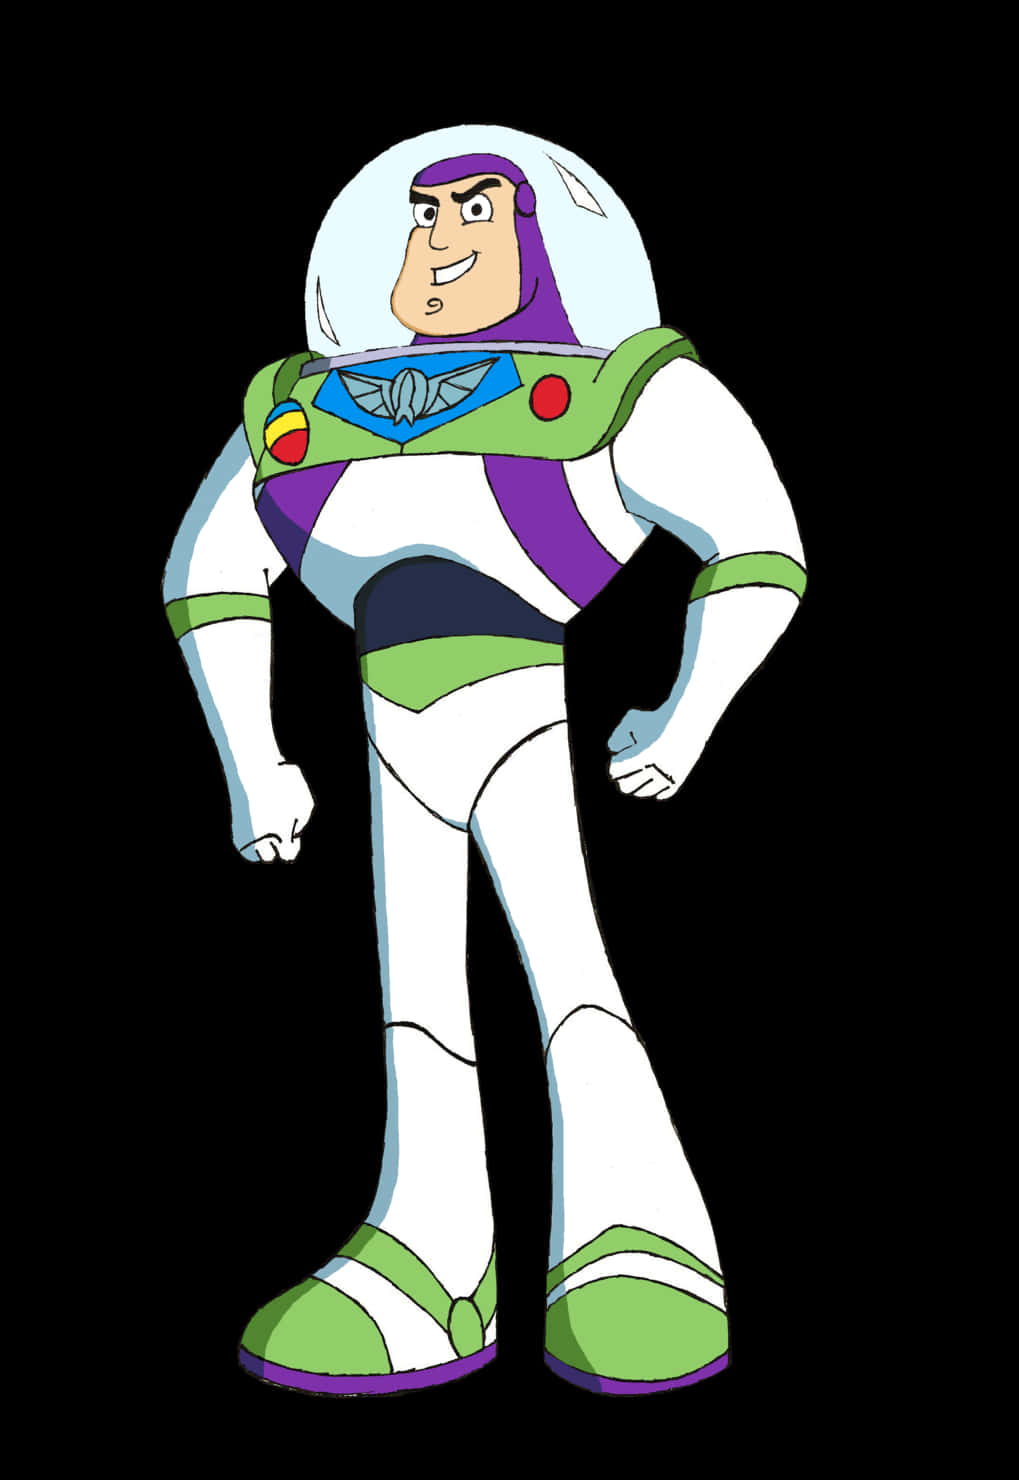 Buzz Lightyear Of Star Command Buzz Lightyear, Hd Png Download